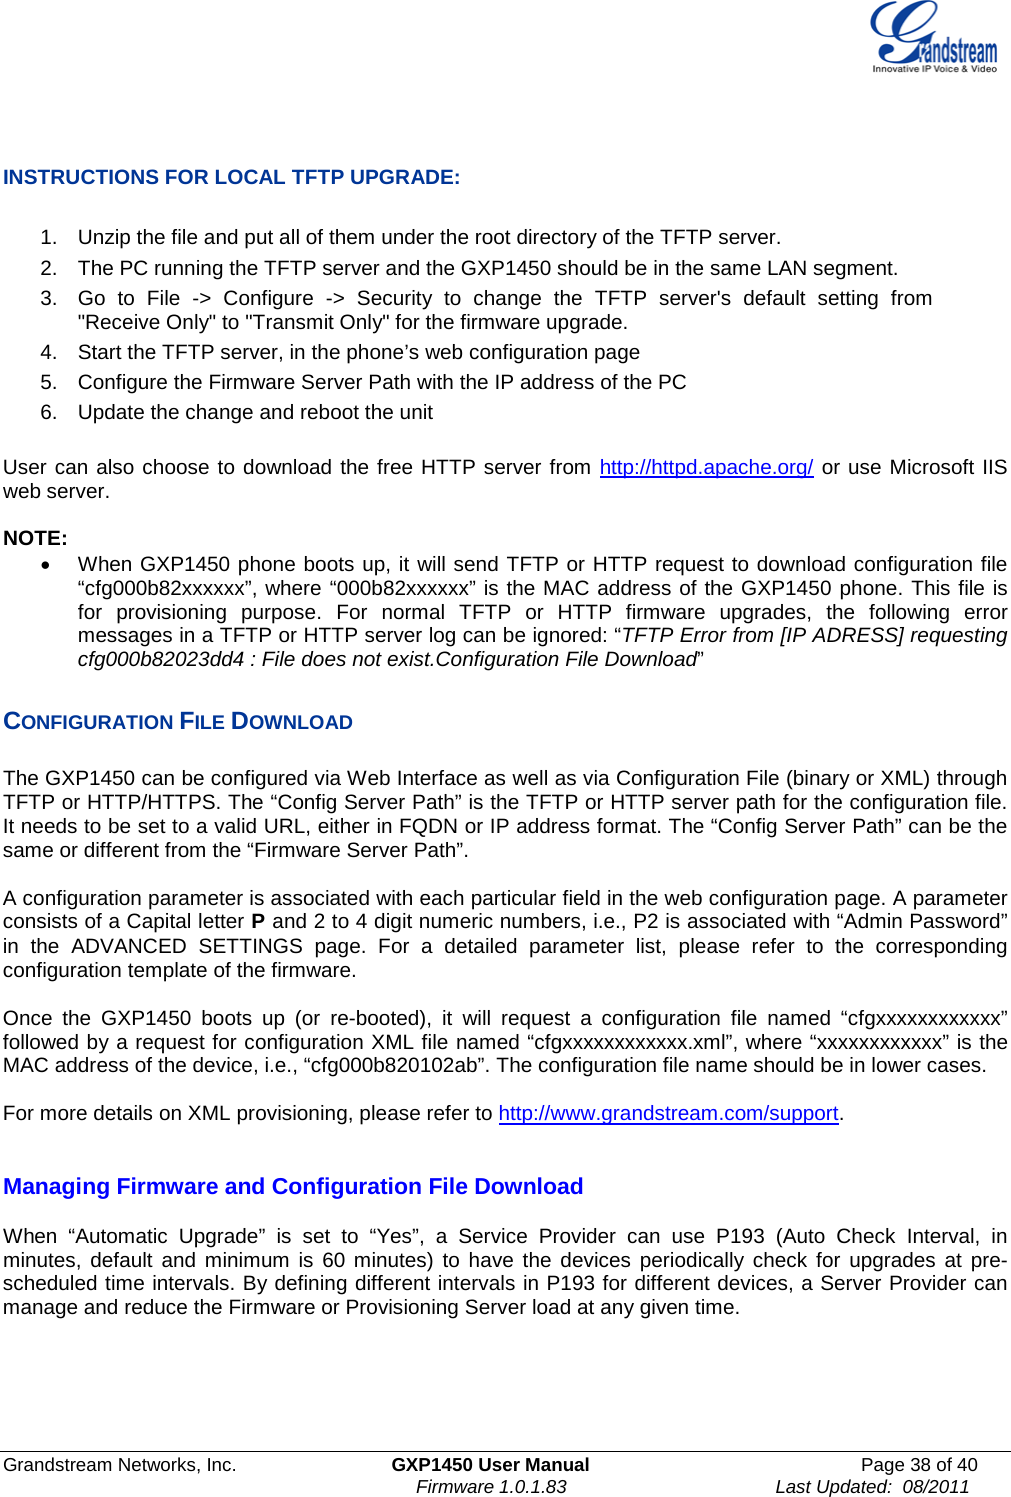  Grandstream Networks, Inc. GXP1450 User Manual Page 38 of 40                                                                         Firmware 1.0.1.83                                        Last Updated:  08/2011    INSTRUCTIONS FOR LOCAL TFTP UPGRADE:  1. Unzip the file and put all of them under the root directory of the TFTP server.  2. The PC running the TFTP server and the GXP1450 should be in the same LAN segment. 3. Go to File -&gt; Configure -&gt; Security to change the TFTP server&apos;s default setting from &quot;Receive Only&quot; to &quot;Transmit Only&quot; for the firmware upgrade.  4. Start the TFTP server, in the phone’s web configuration page 5. Configure the Firmware Server Path with the IP address of the PC 6. Update the change and reboot the unit   User can also choose to download the free HTTP server from http://httpd.apache.org/ or use Microsoft IIS web server.  NOTE: • When GXP1450 phone boots up, it will send TFTP or HTTP request to download configuration file “cfg000b82xxxxxx”, where “000b82xxxxxx” is the MAC address of the GXP1450 phone. This file is for provisioning purpose. For normal TFTP or HTTP firmware upgrades, the following error messages in a TFTP or HTTP server log can be ignored: “TFTP Error from [IP ADRESS] requesting cfg000b82023dd4 : File does not exist.Configuration File Download”  CONFIGURATION FILE DOWNLOAD  The GXP1450 can be configured via Web Interface as well as via Configuration File (binary or XML) through TFTP or HTTP/HTTPS. The “Config Server Path” is the TFTP or HTTP server path for the configuration file. It needs to be set to a valid URL, either in FQDN or IP address format. The “Config Server Path” can be the same or different from the “Firmware Server Path”.  A configuration parameter is associated with each particular field in the web configuration page. A parameter consists of a Capital letter P and 2 to 4 digit numeric numbers, i.e., P2 is associated with “Admin Password” in the ADVANCED SETTINGS page. For a detailed parameter list, please refer to the corresponding configuration template of the firmware.   Once the GXP1450 boots up (or re-booted), it will request a configuration file named “cfgxxxxxxxxxxxx” followed by a request for configuration XML file named “cfgxxxxxxxxxxxx.xml”, where “xxxxxxxxxxxx” is the MAC address of the device, i.e., “cfg000b820102ab”. The configuration file name should be in lower cases.  For more details on XML provisioning, please refer to http://www.grandstream.com/support.     Managing Firmware and Configuration File Download  When “Automatic Upgrade” is set to “Yes”, a Service Provider can use P193 (Auto Check Interval, in minutes, default and minimum is 60 minutes) to have the devices periodically check for upgrades at pre-scheduled time intervals. By defining different intervals in P193 for different devices, a Server Provider can manage and reduce the Firmware or Provisioning Server load at any given time.  